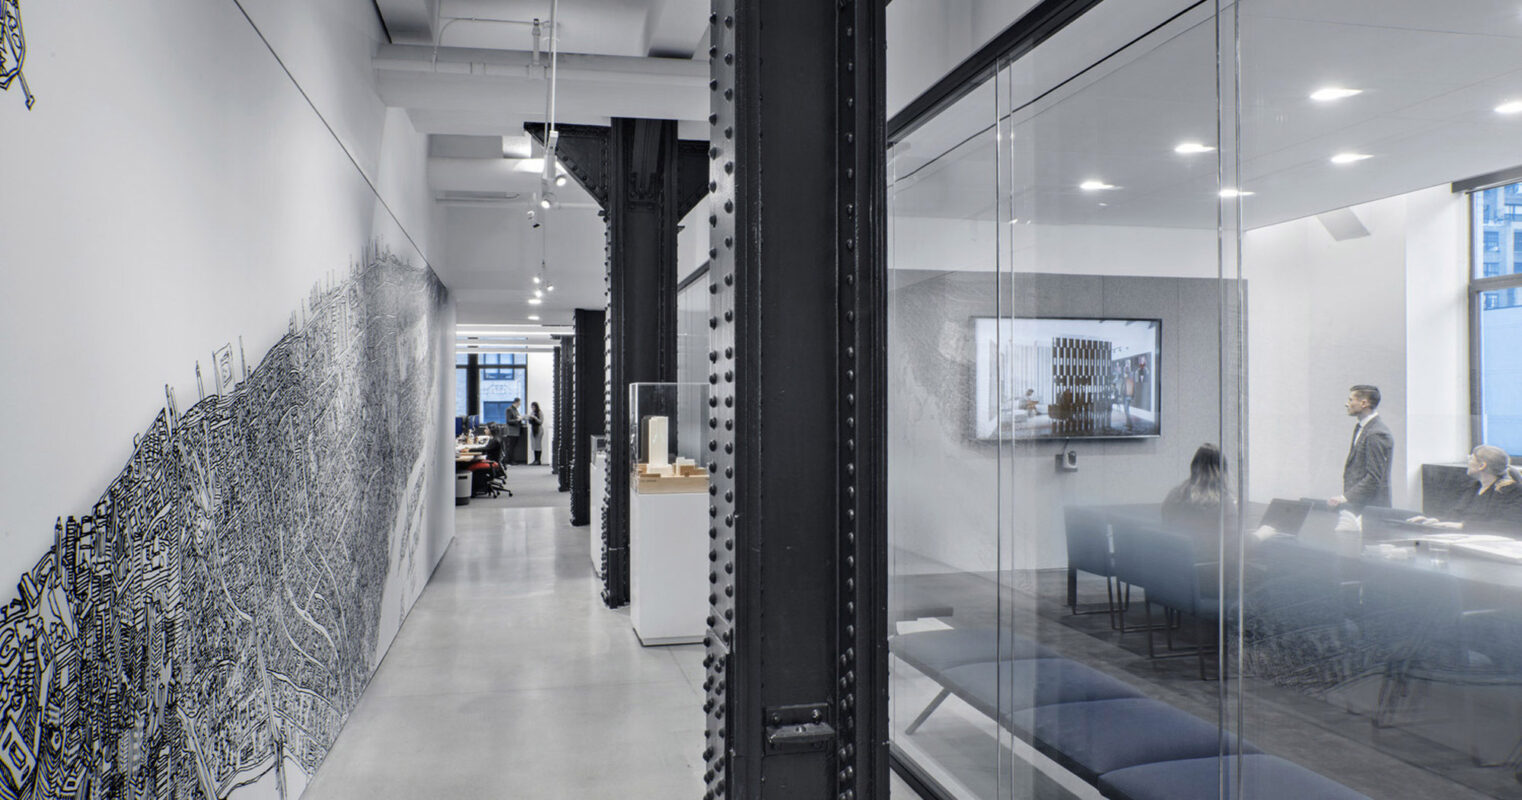 A spacious modern office corridor with industrial-style exposed ceiling piping, contrasting with sleek glass partition walls and monochromatic art. Staff navigate the open-plan workspace beyond, visible through the transparent interfaces that enhance a sense of connectivity and light flow.